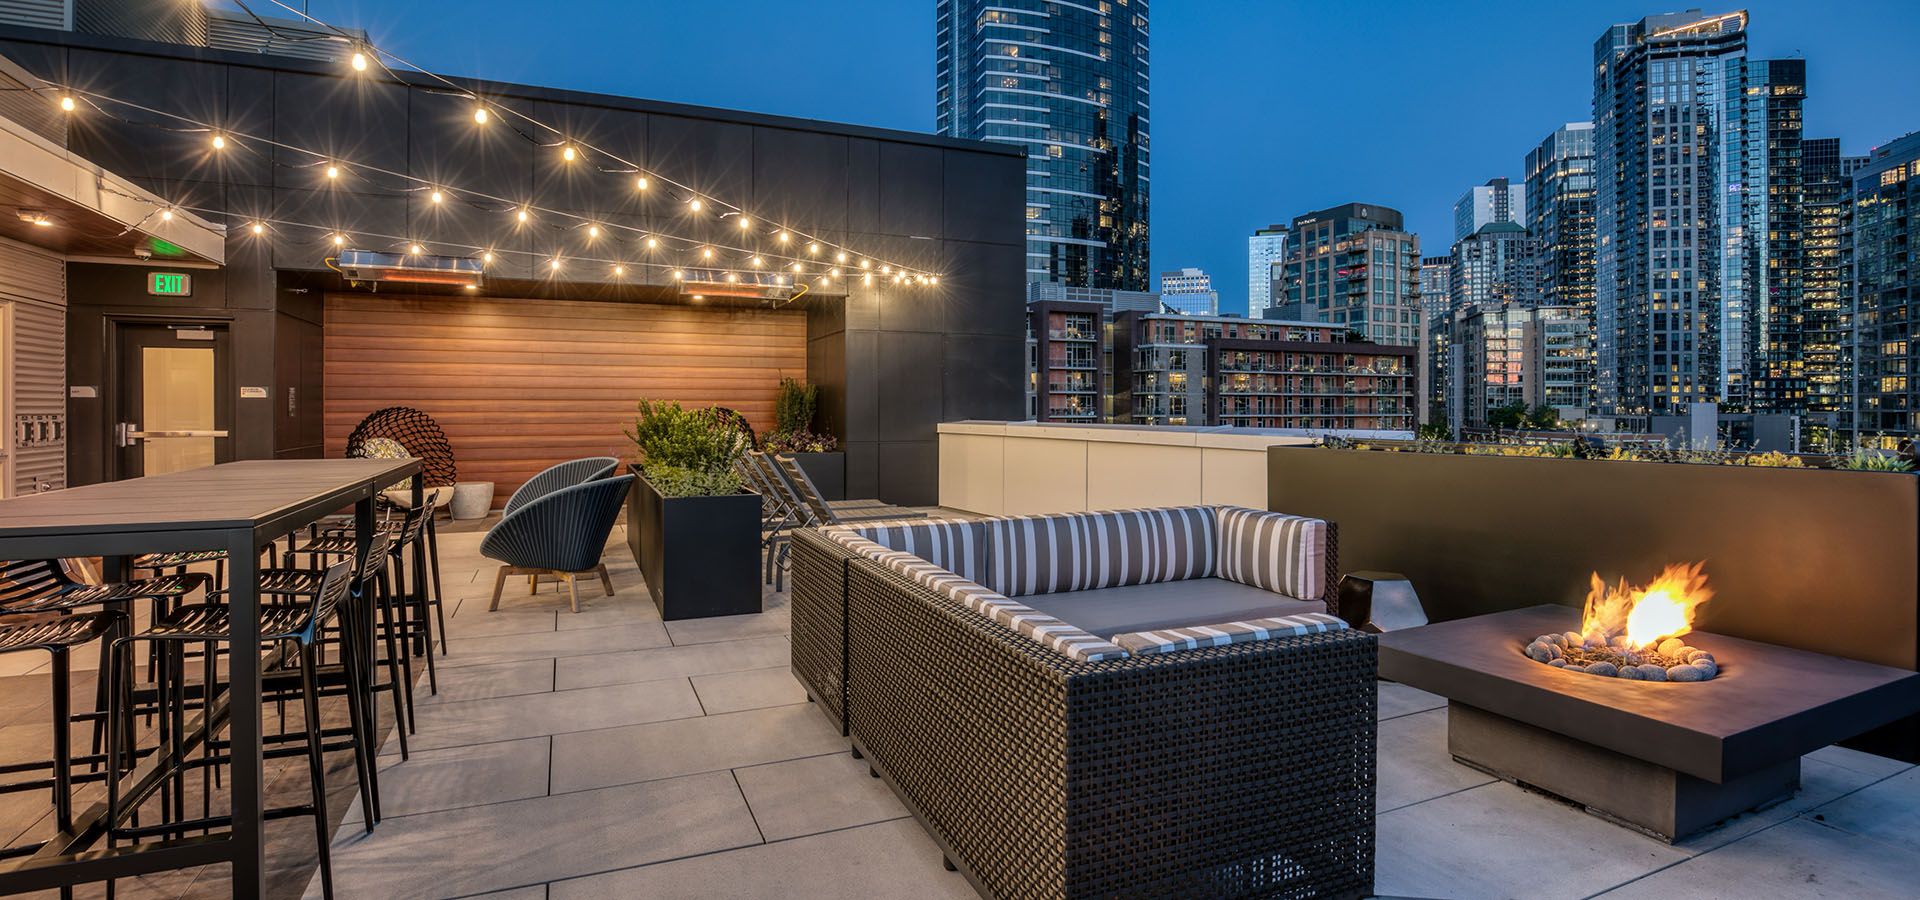 Image of Orion rooftop deck